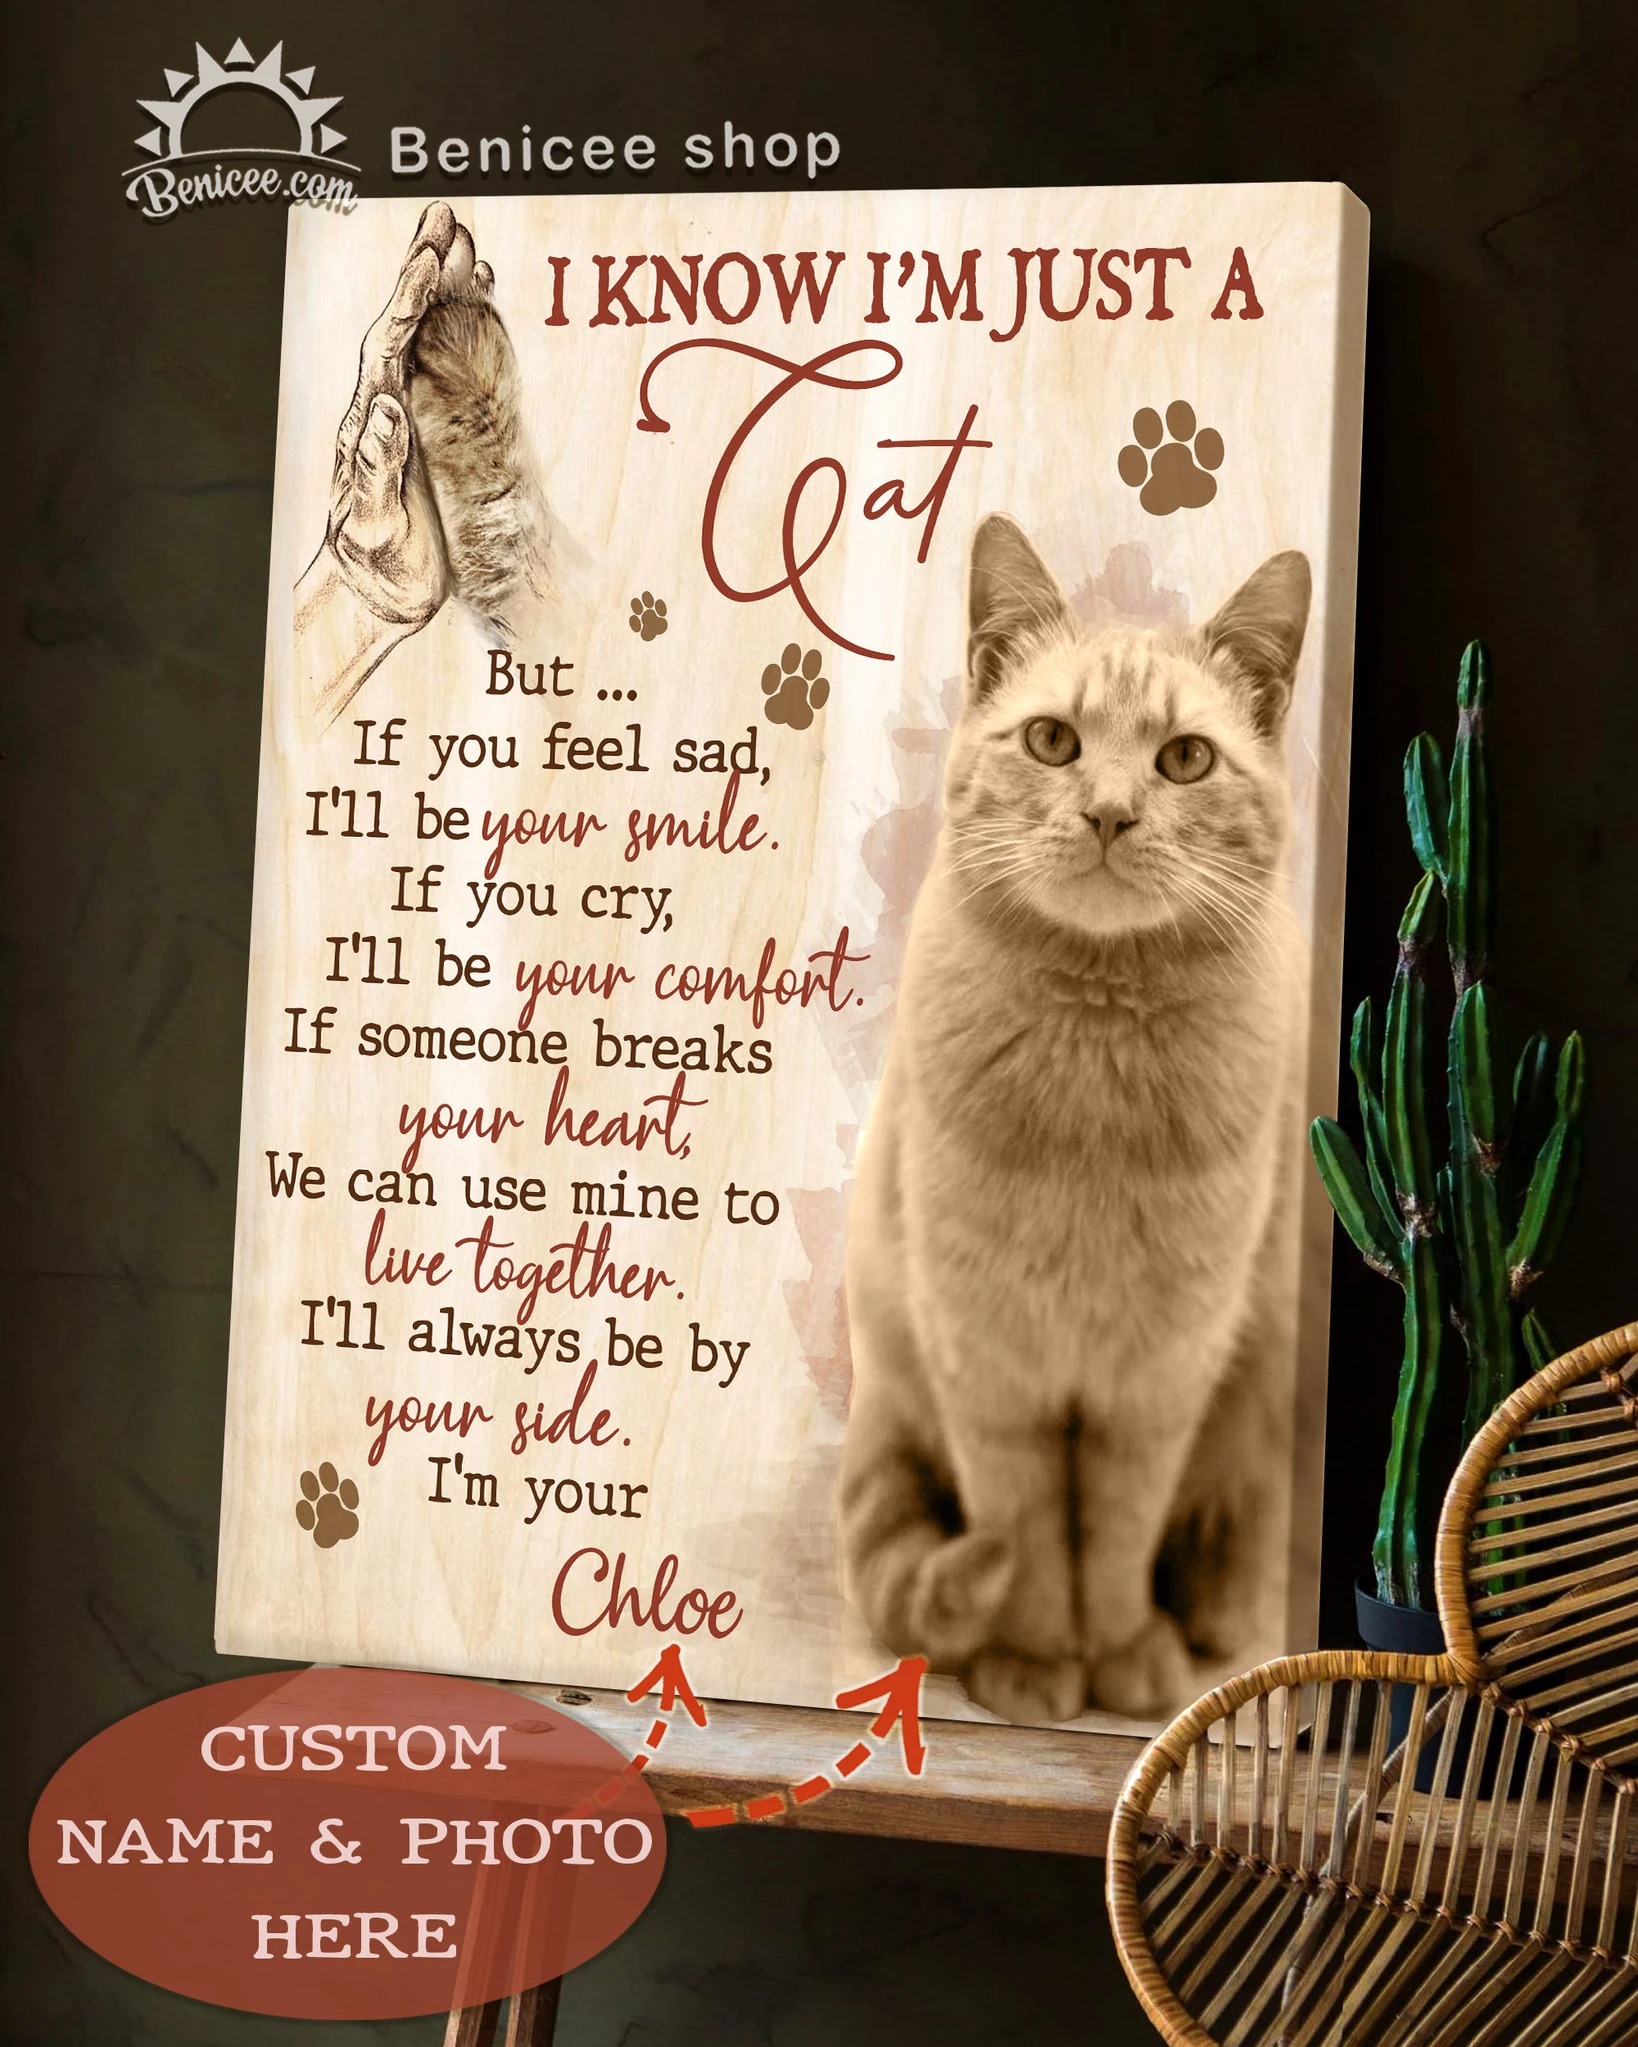 Custom photo and name i know i’m just a cat canvas prints – Hothot